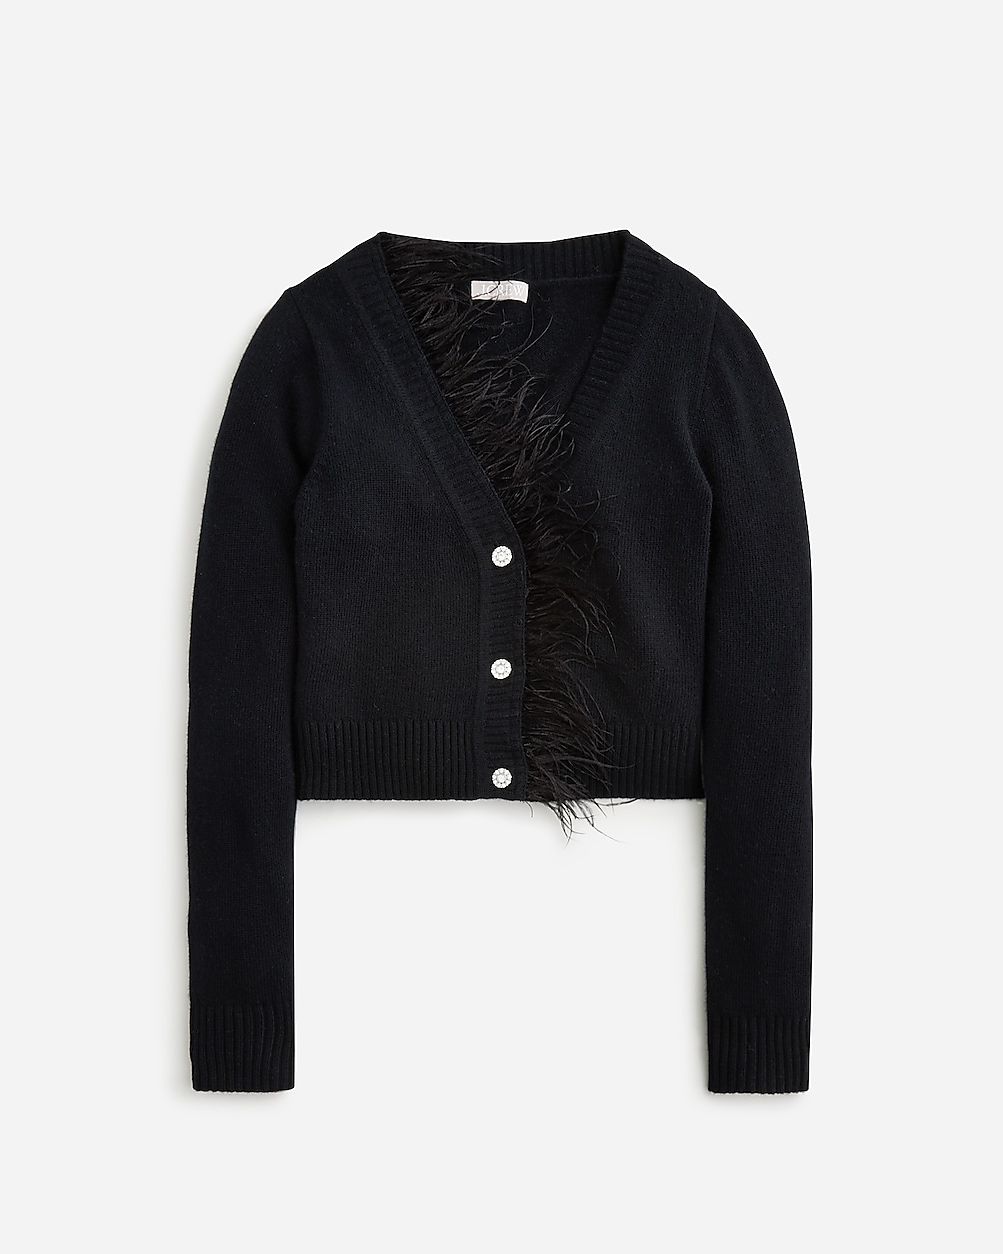 Feather-trim cropped cardigan sweater with jewel buttons | J.Crew US